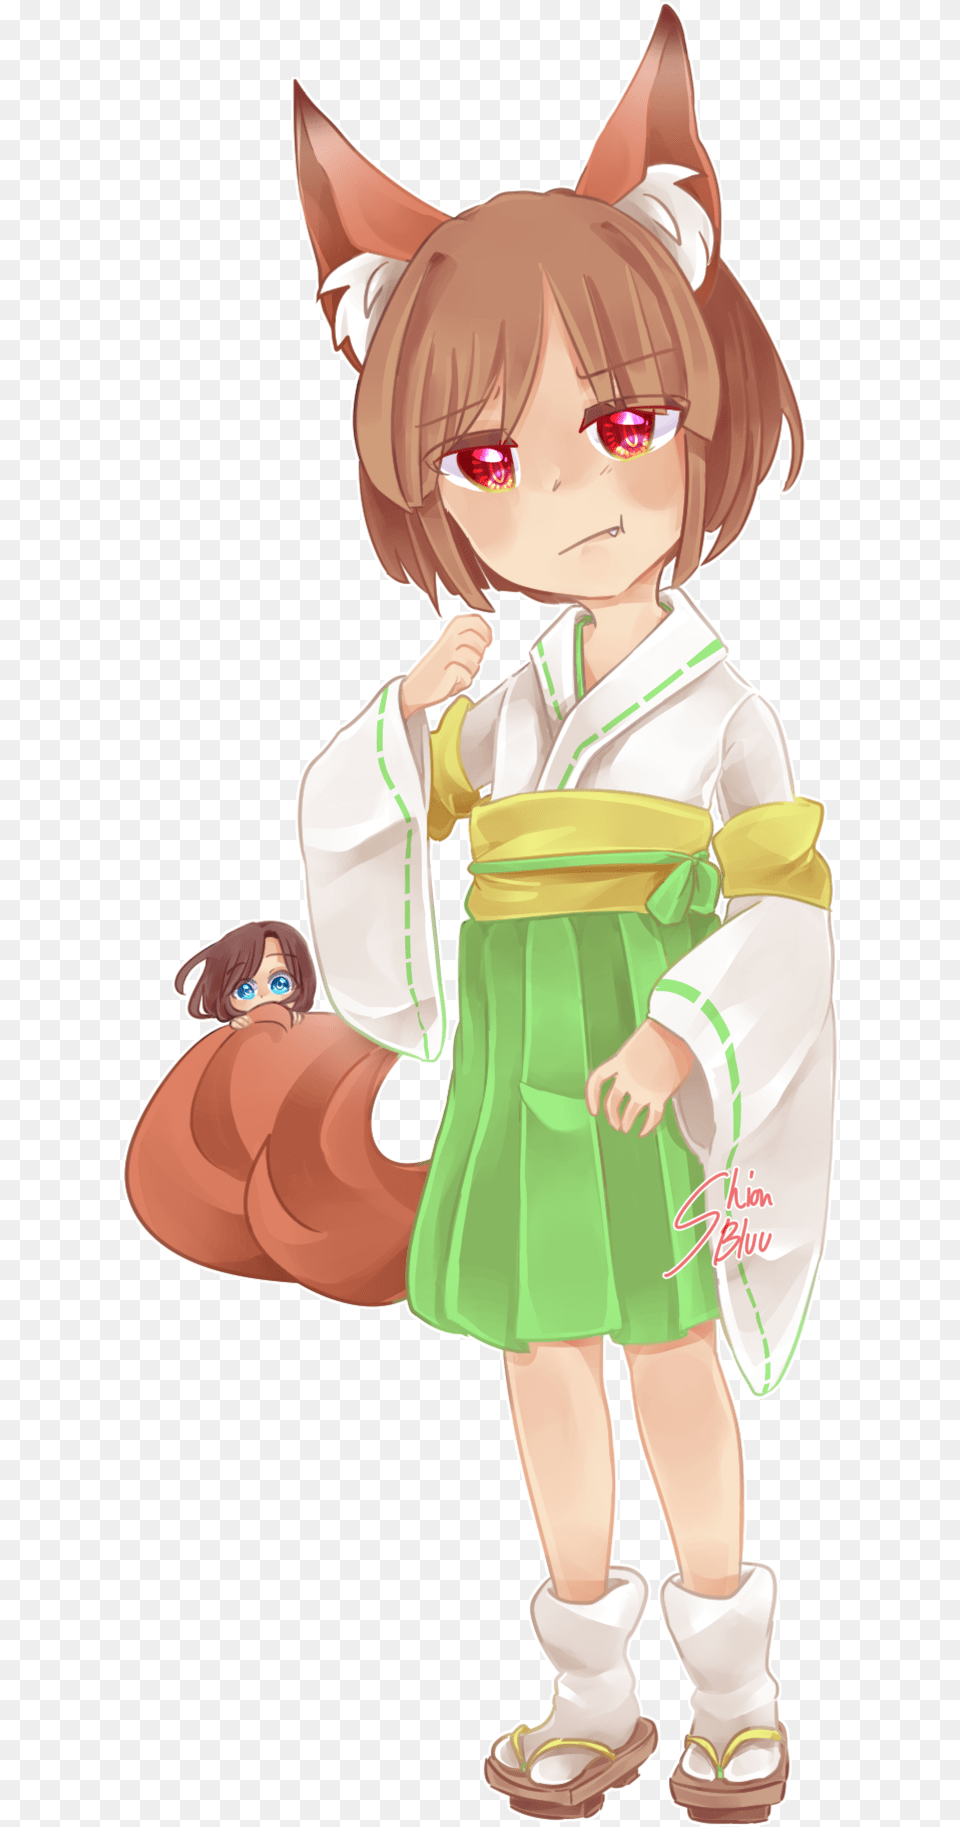 Kitsune Chara Drawn By Shionbluui Mentioned This Cartoon, Publication, Book, Comics, Person Png